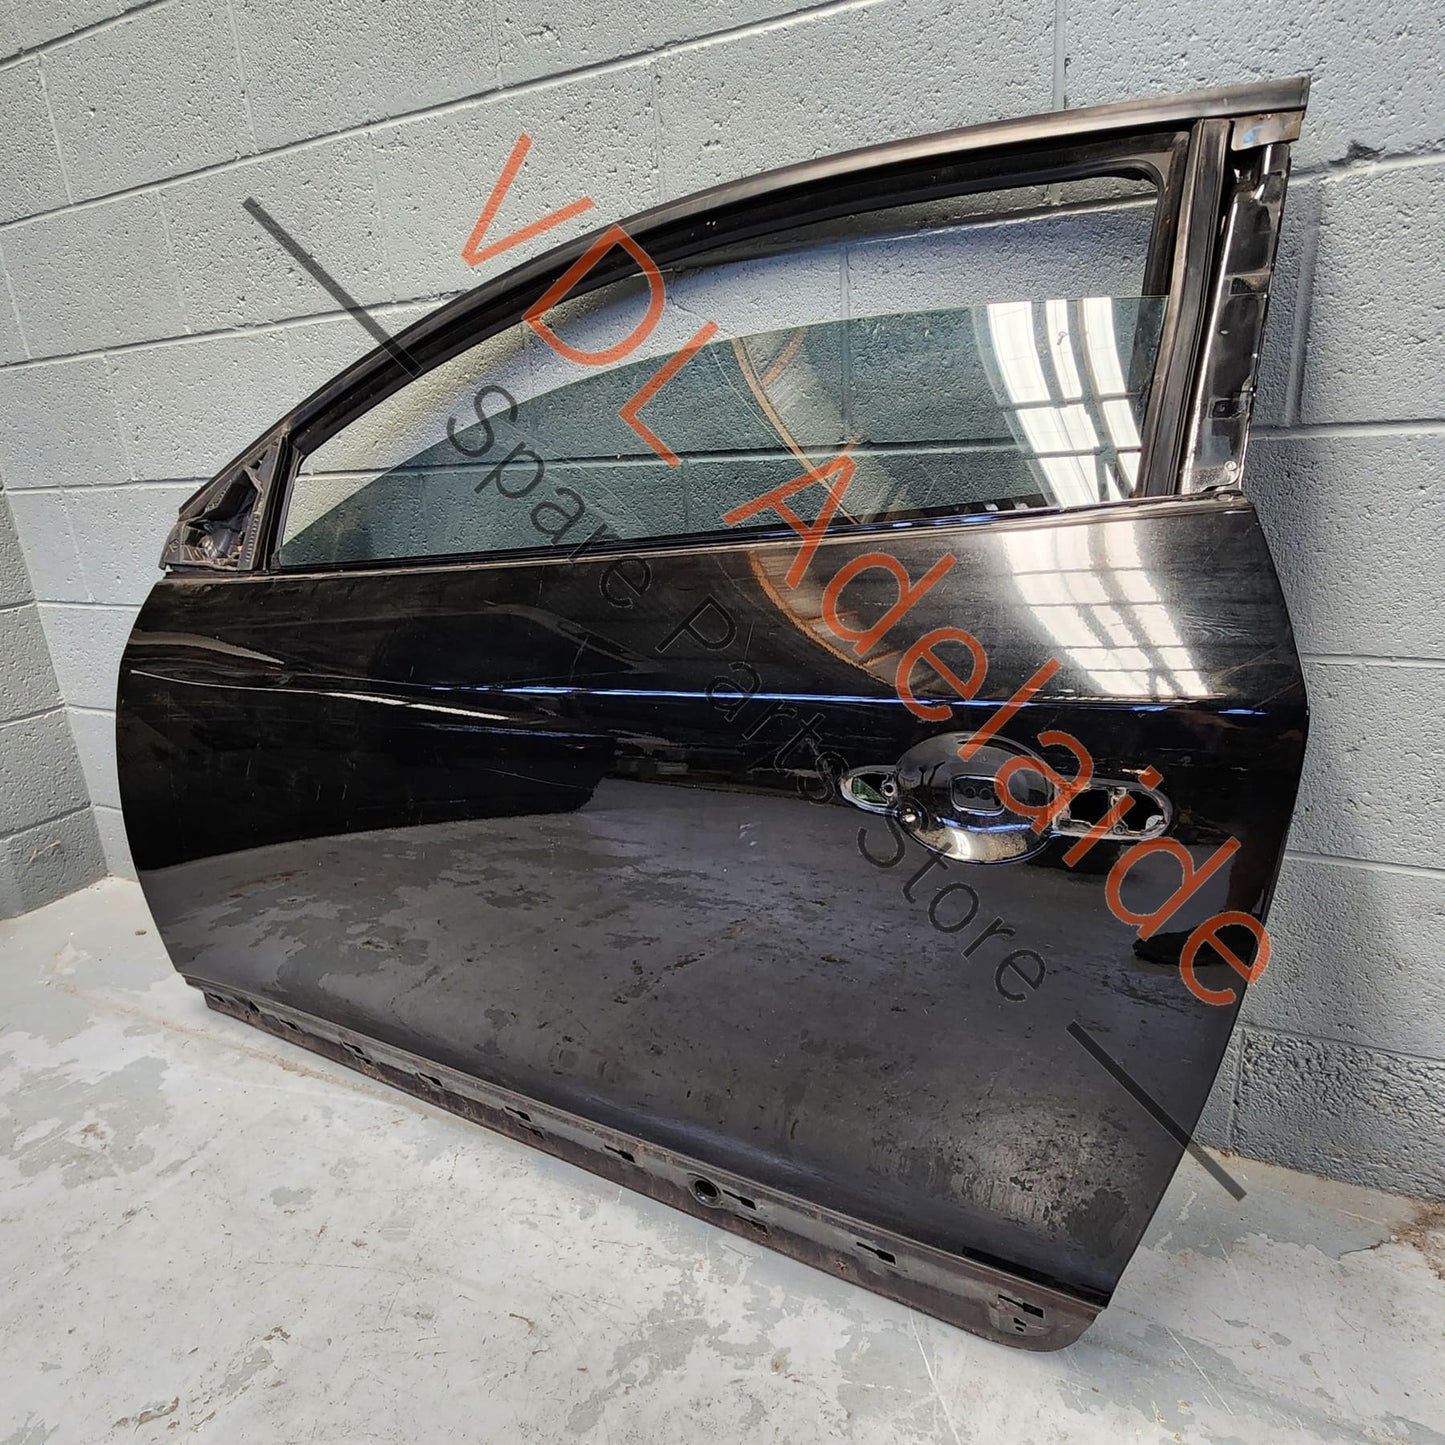 801015283R803014156R Renault Megane RS250 RS265 RS275 Front Left Door Shell Panel 801015283R w Glass 803014156R